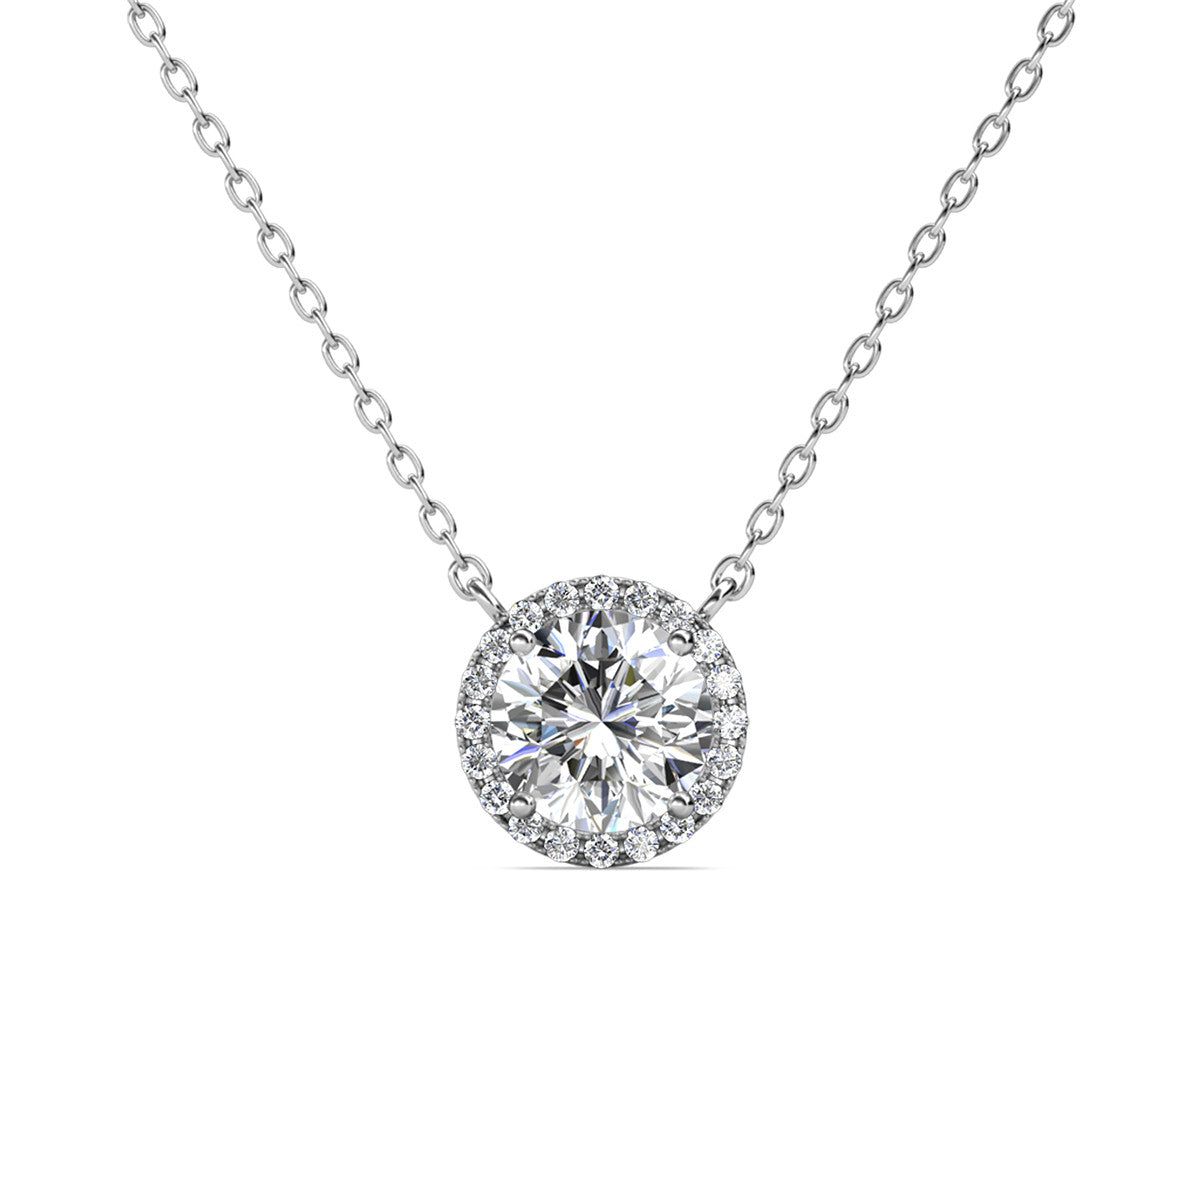 Moissanite by Cate & Chloe Sutton Sterling Silver Necklace with Moissanite and 5A Cubic Zirconia Crystals